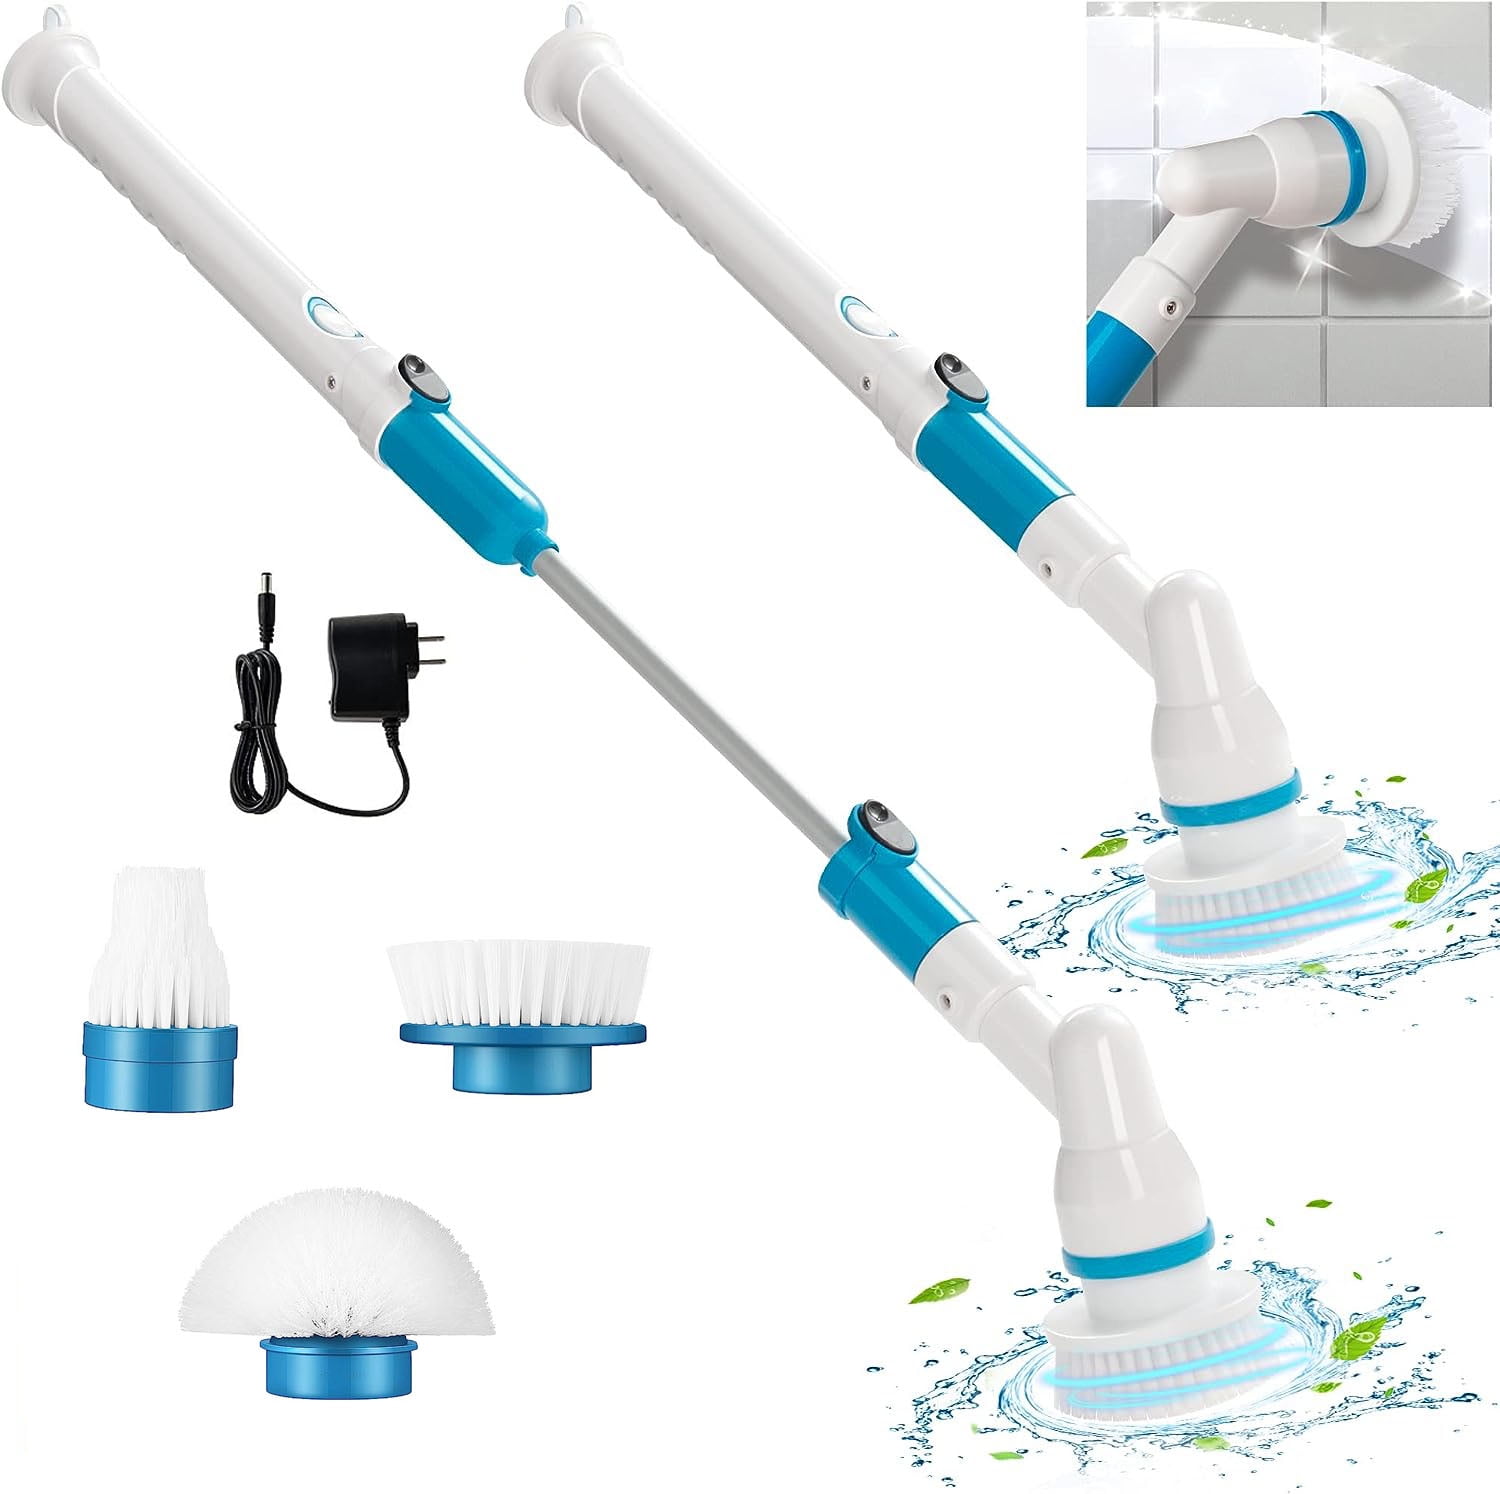 Electric Spin Scrubber, Scrub Brush Dual Speed, Power Shower Scrubber with  6 Replacement Head, Cordless Cleaning Brush with Extension Handle for